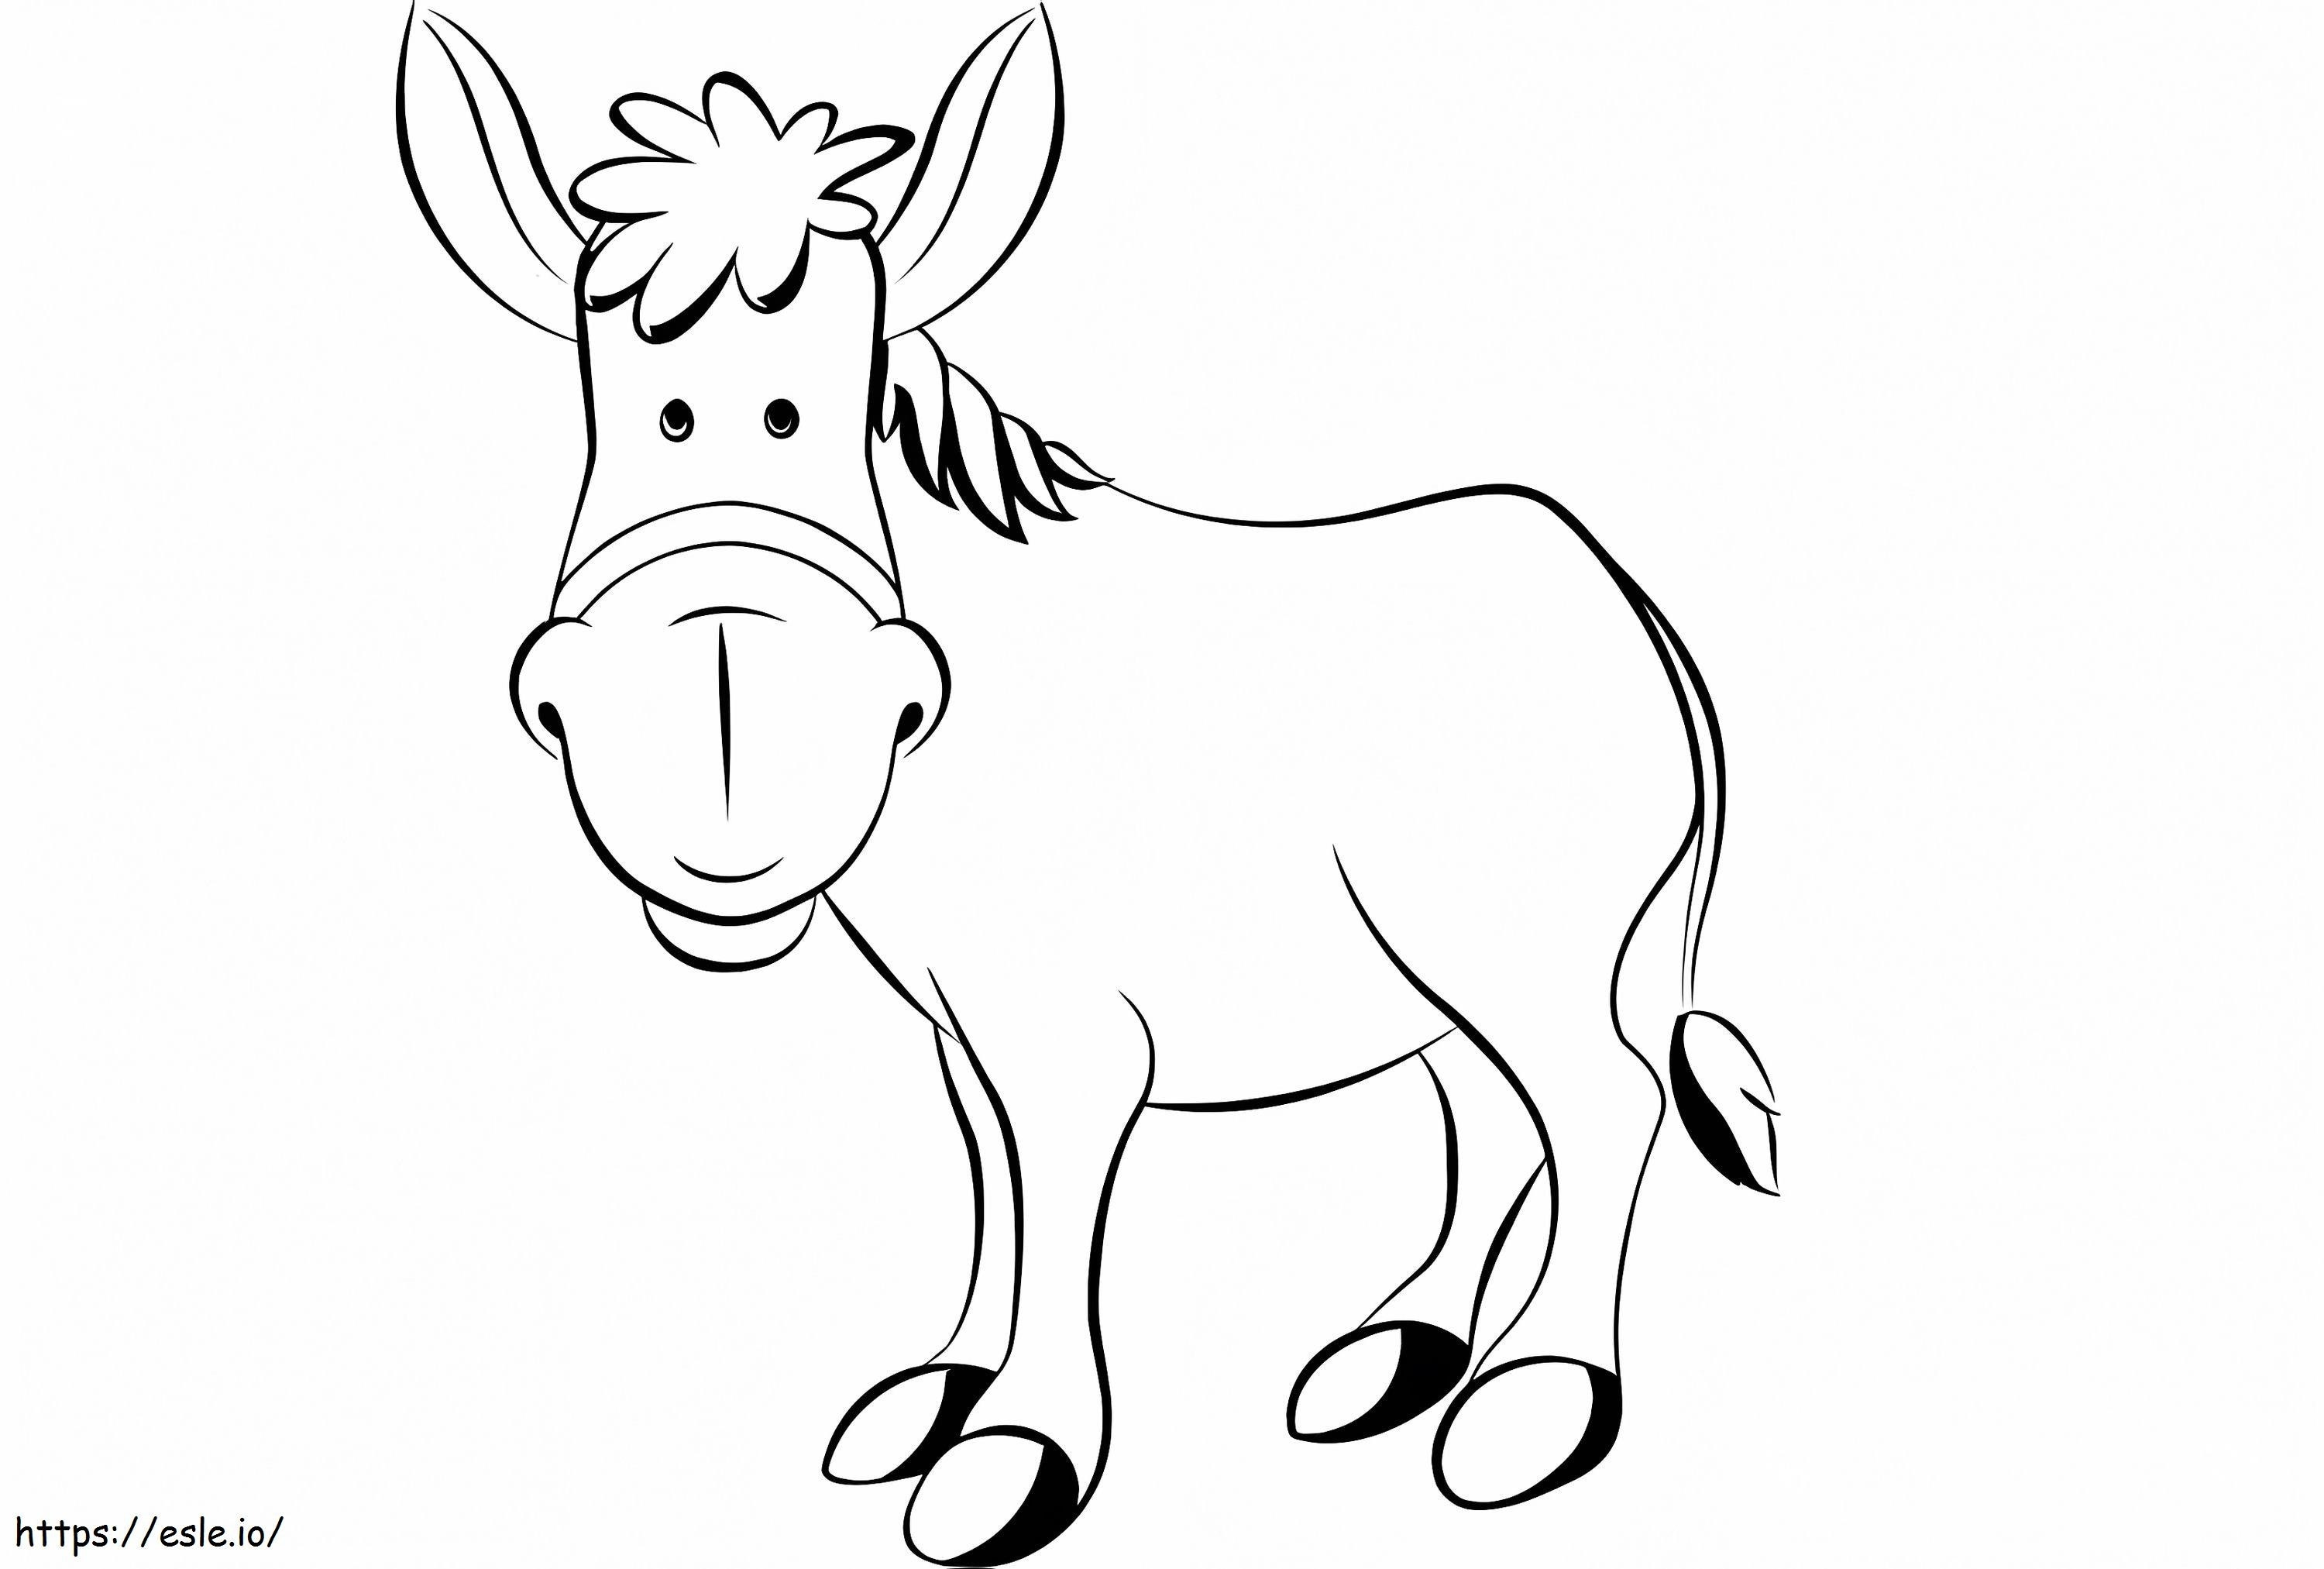 Smiling Donkey coloring page